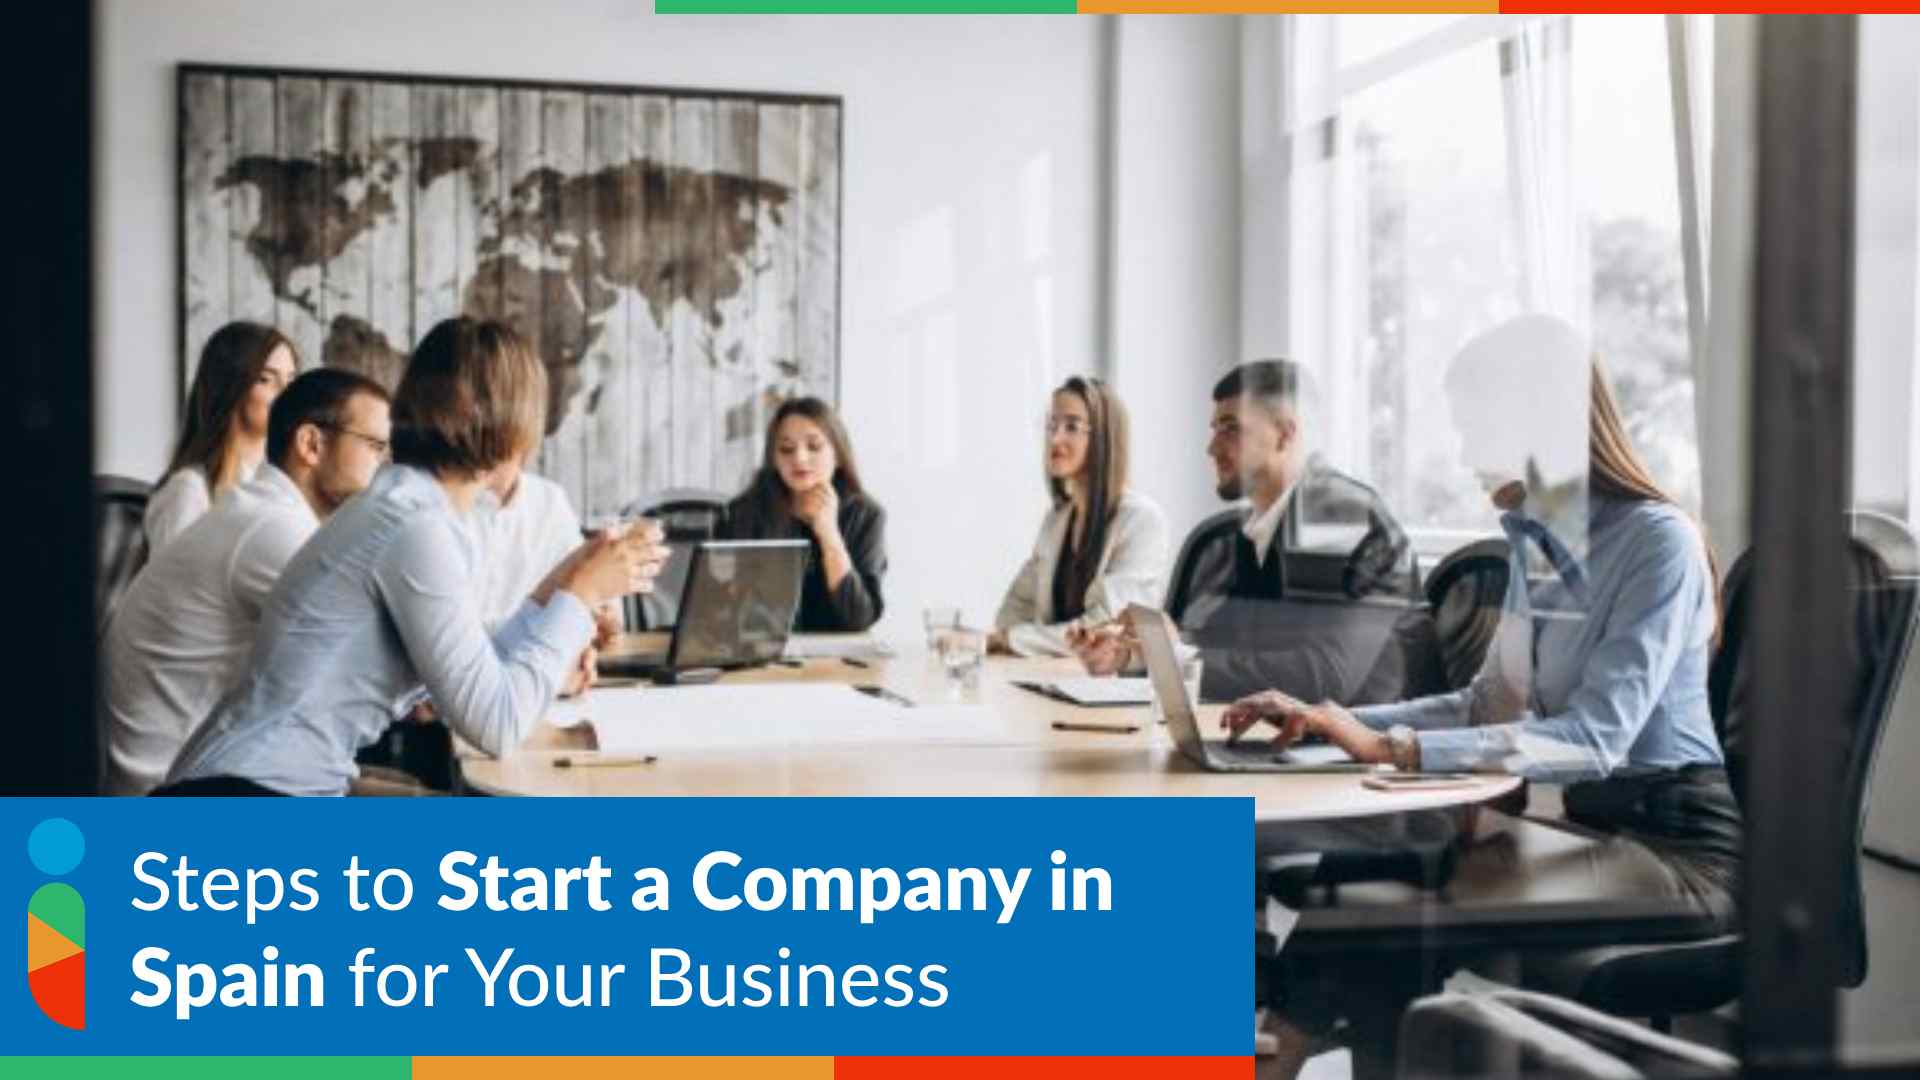 Steps to Start a Company in Spain for Your Business